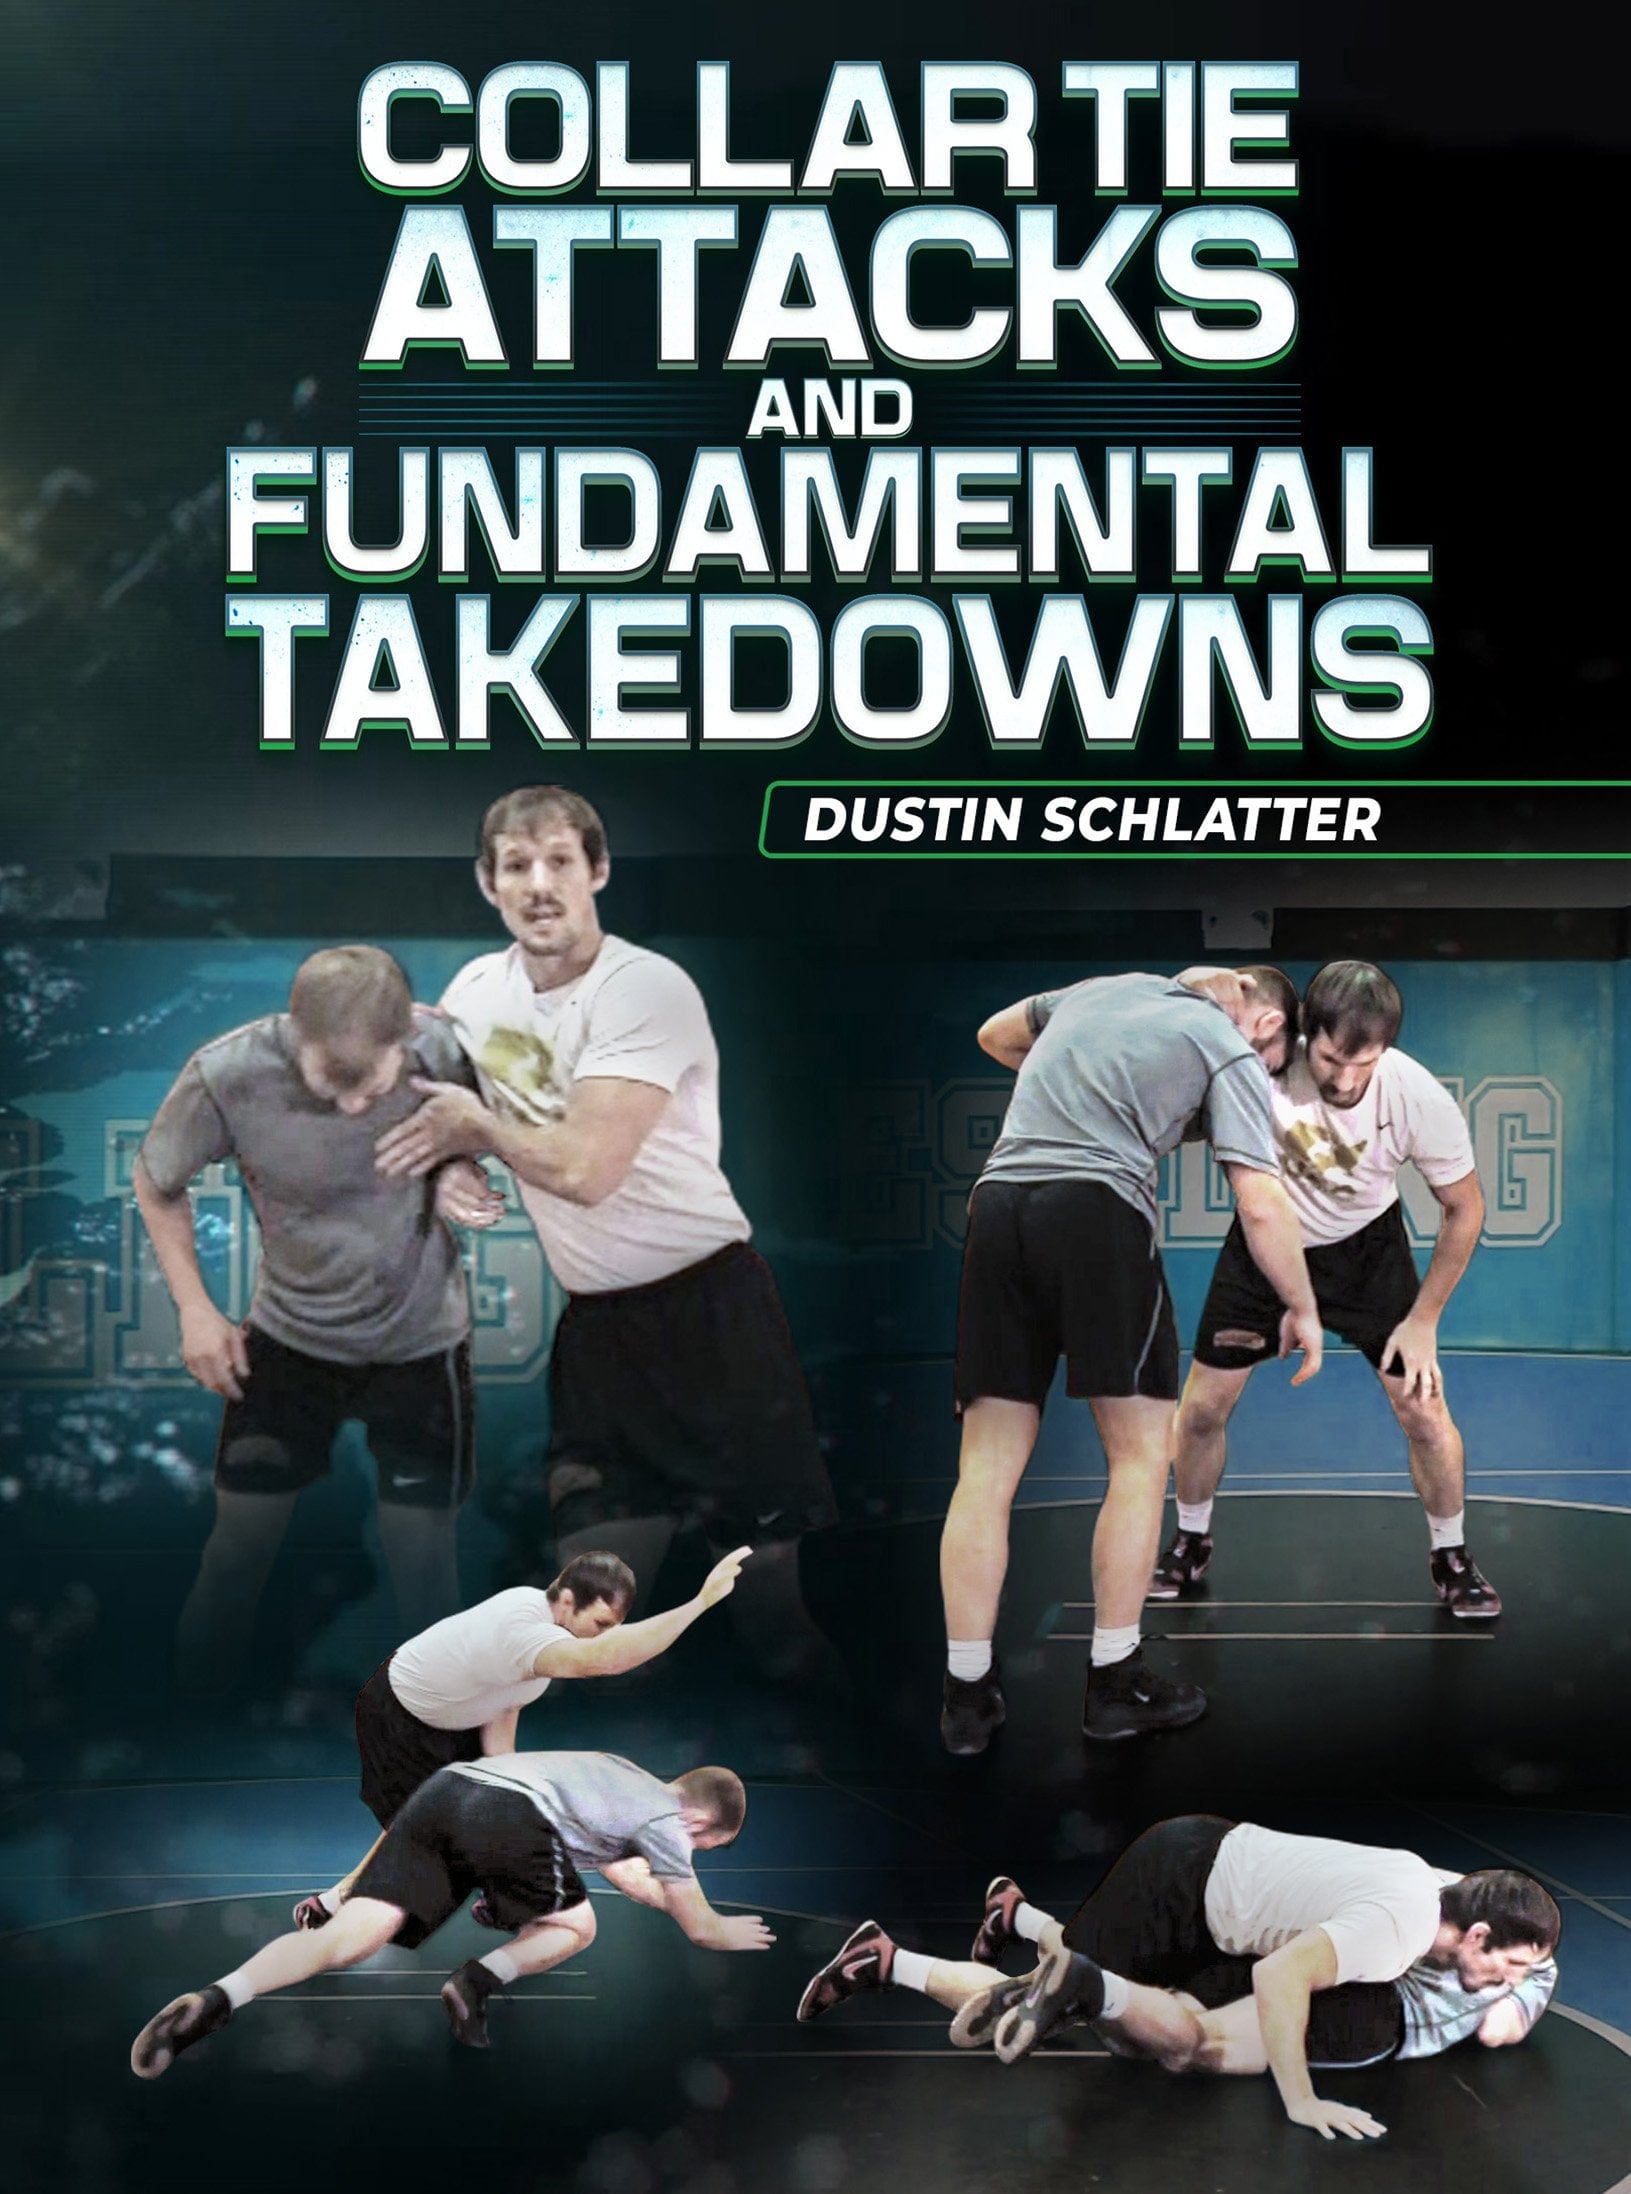 Collar Tie Attacks and Fundamental Takedowns by Dustin Schlatter - Fanatic Wrestling